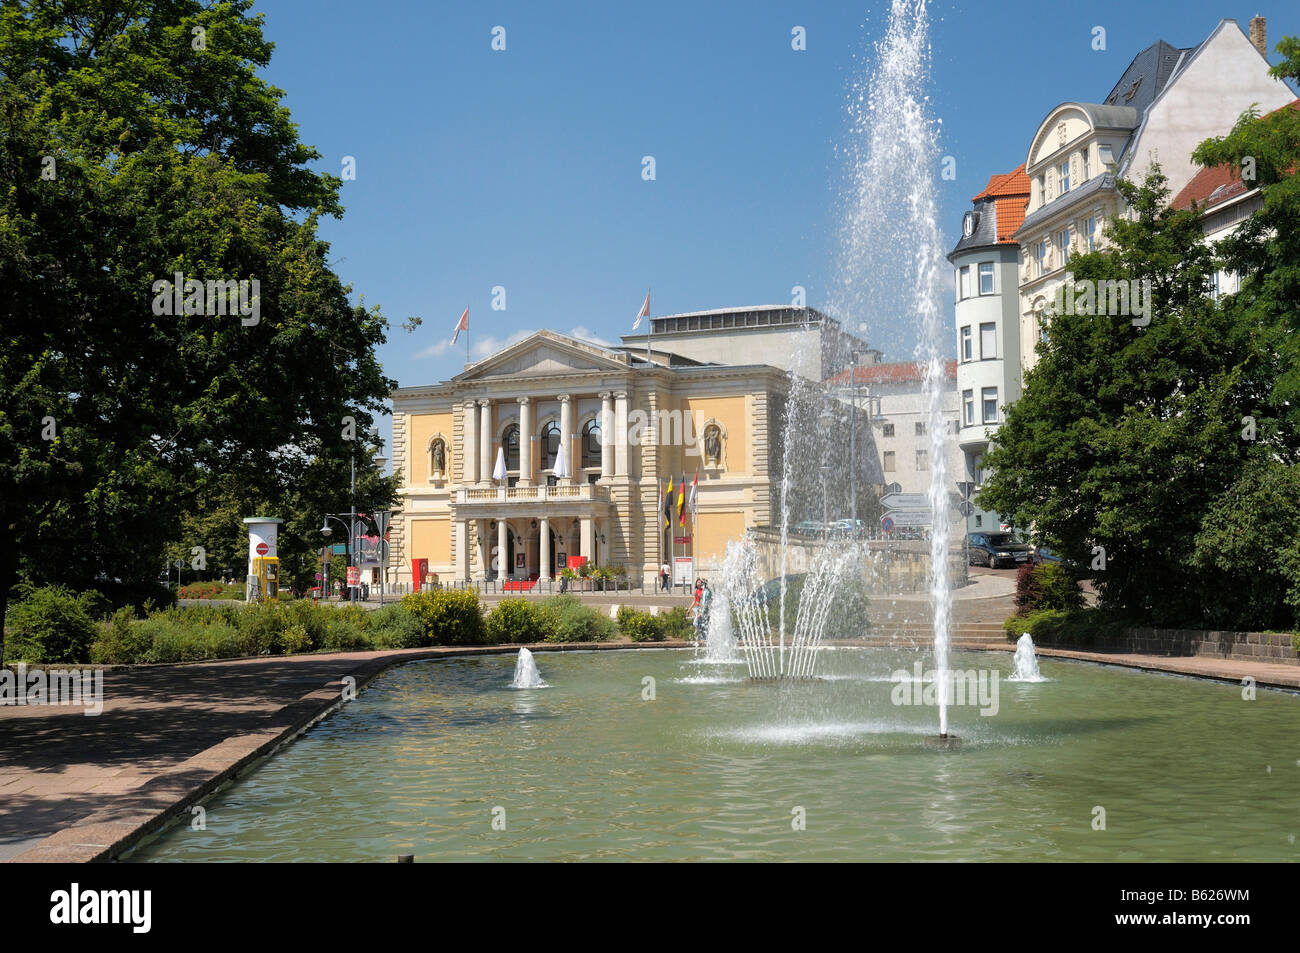 Fountain in front of the opera house, Universitaetsring, Halle/Saale, Saxony-Anhalt, Germany, Europe Stock Photo